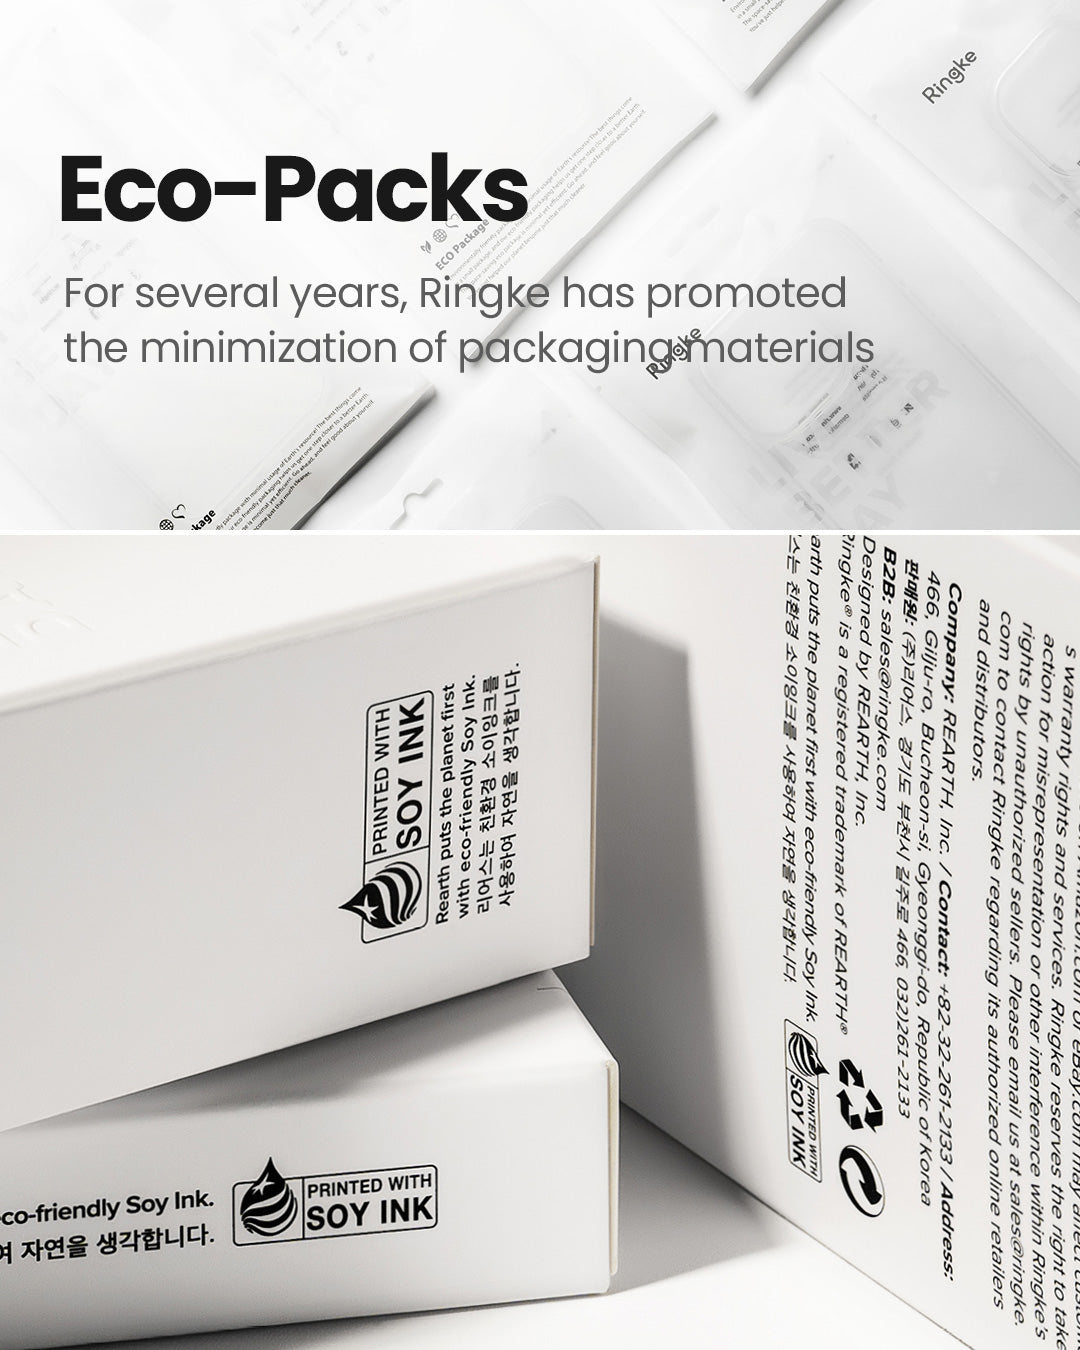 Eco-Packs. For several years, Ringke has promoted the minimization of packaging materials.